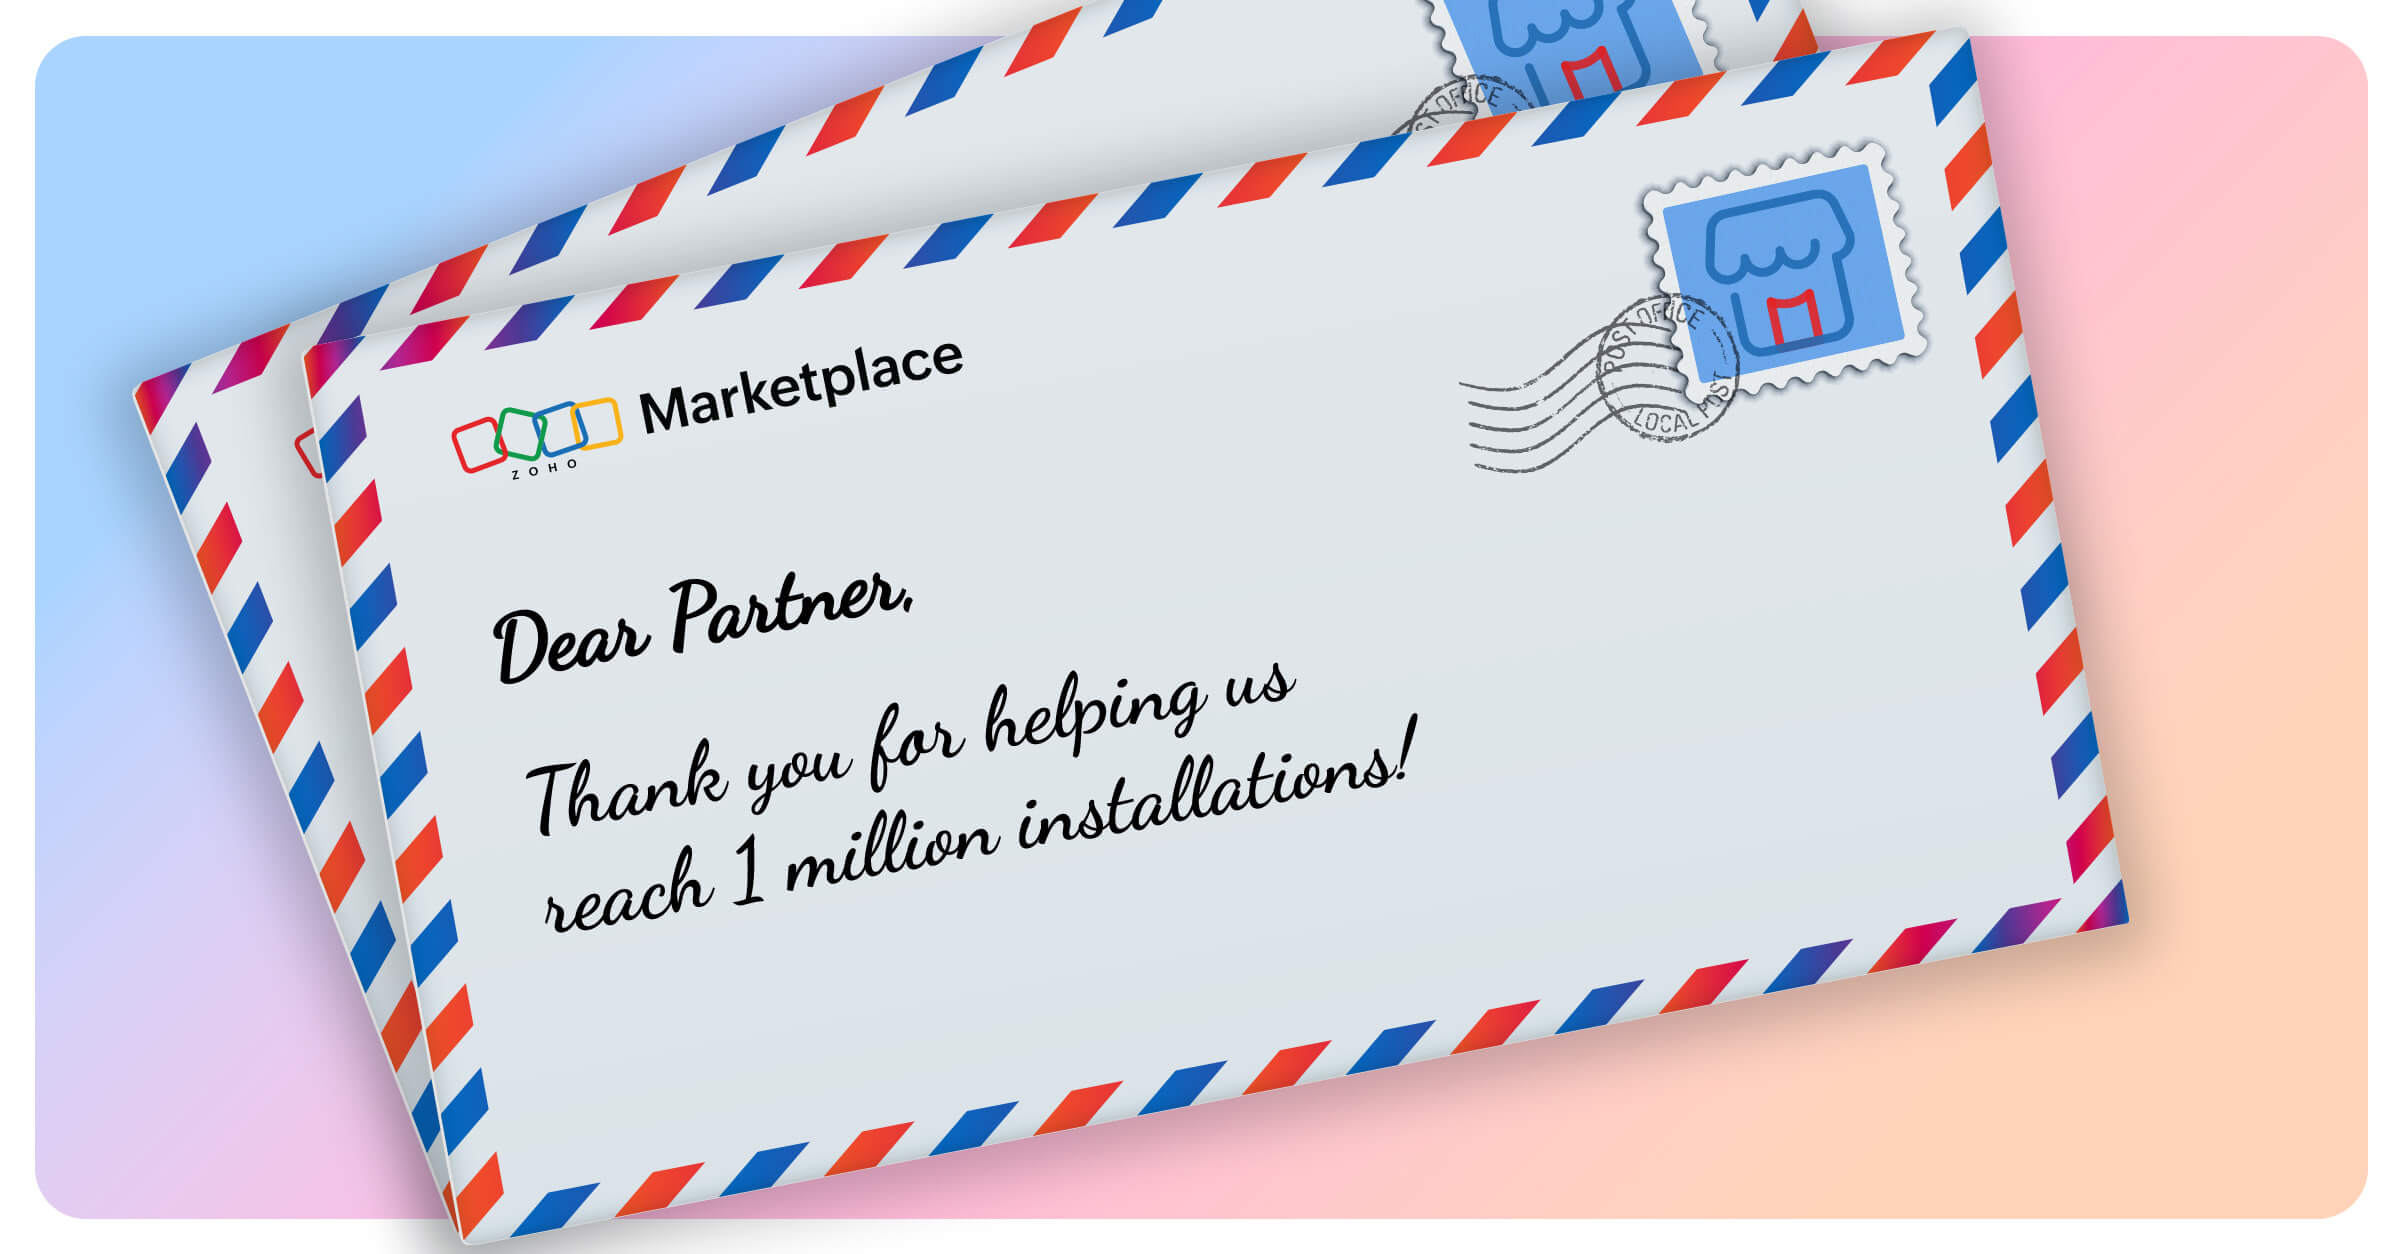 Dear partner, thank you for helping us reach 1 million installations!